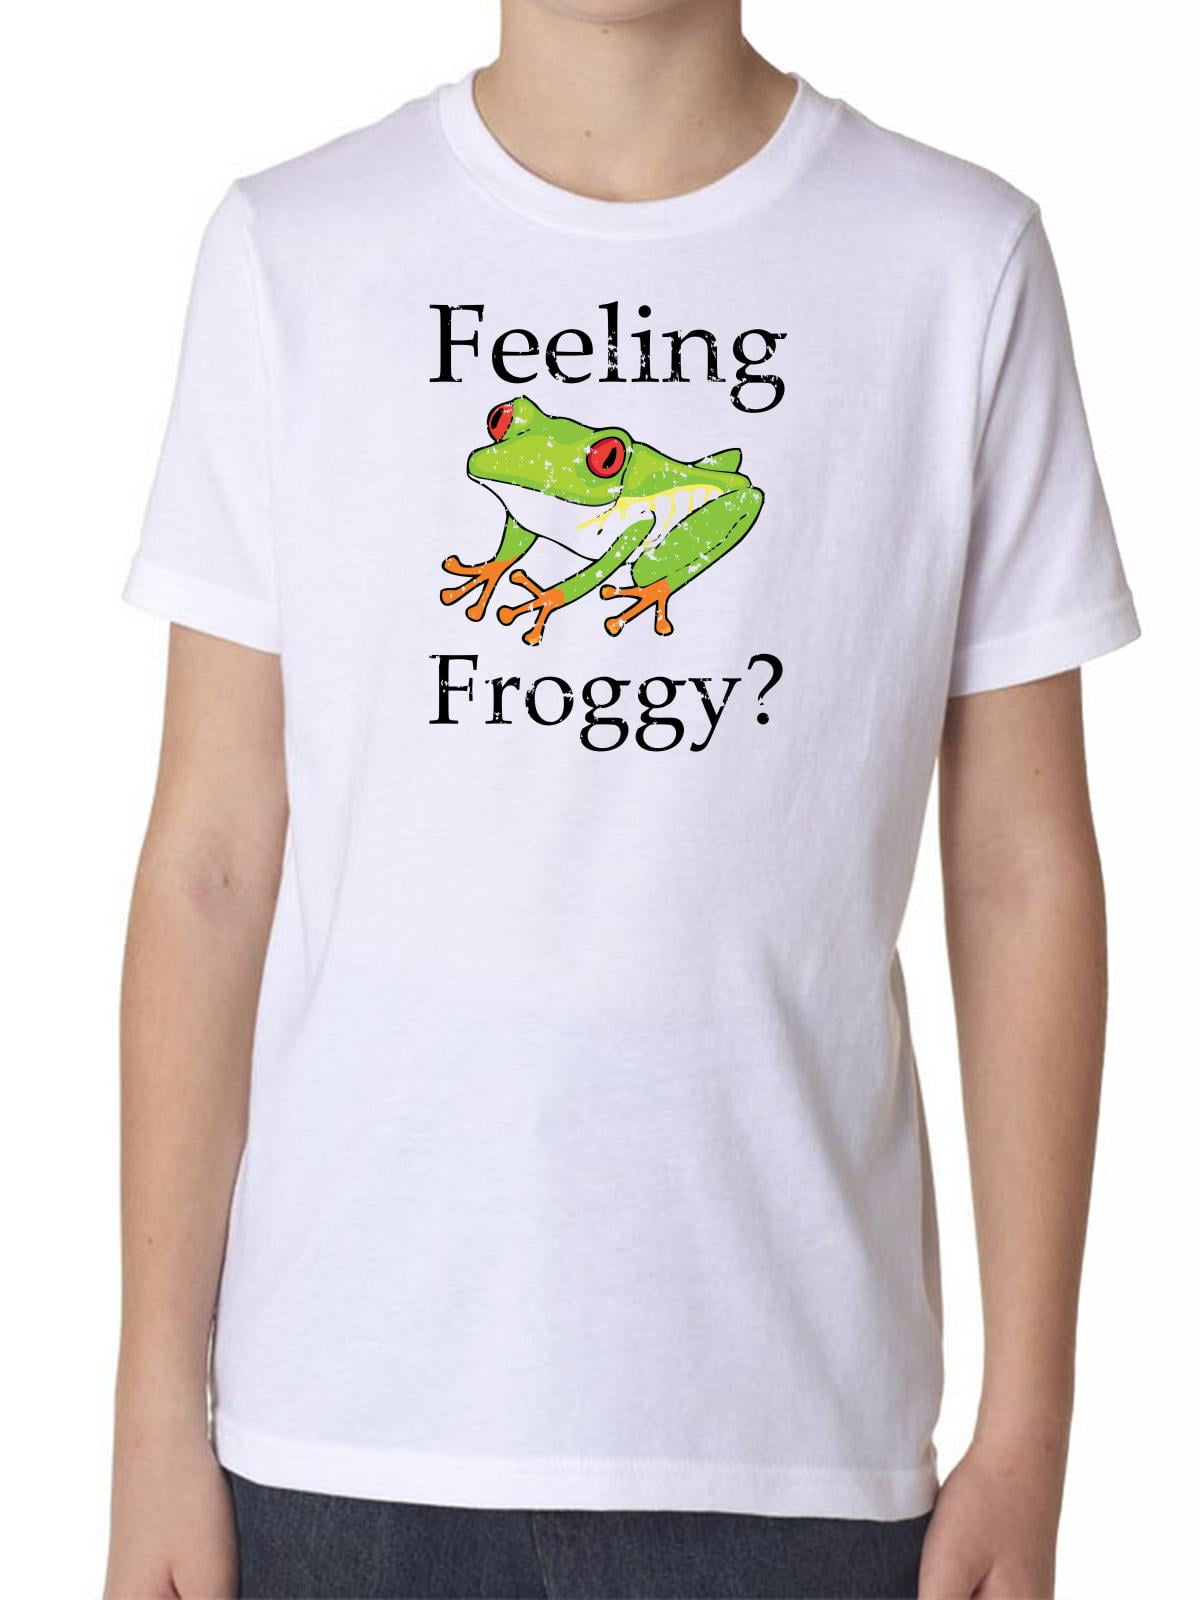 Hollywood Thread - Feeling Froggy - Exotic Frog Reptile Graphic Boy's ...